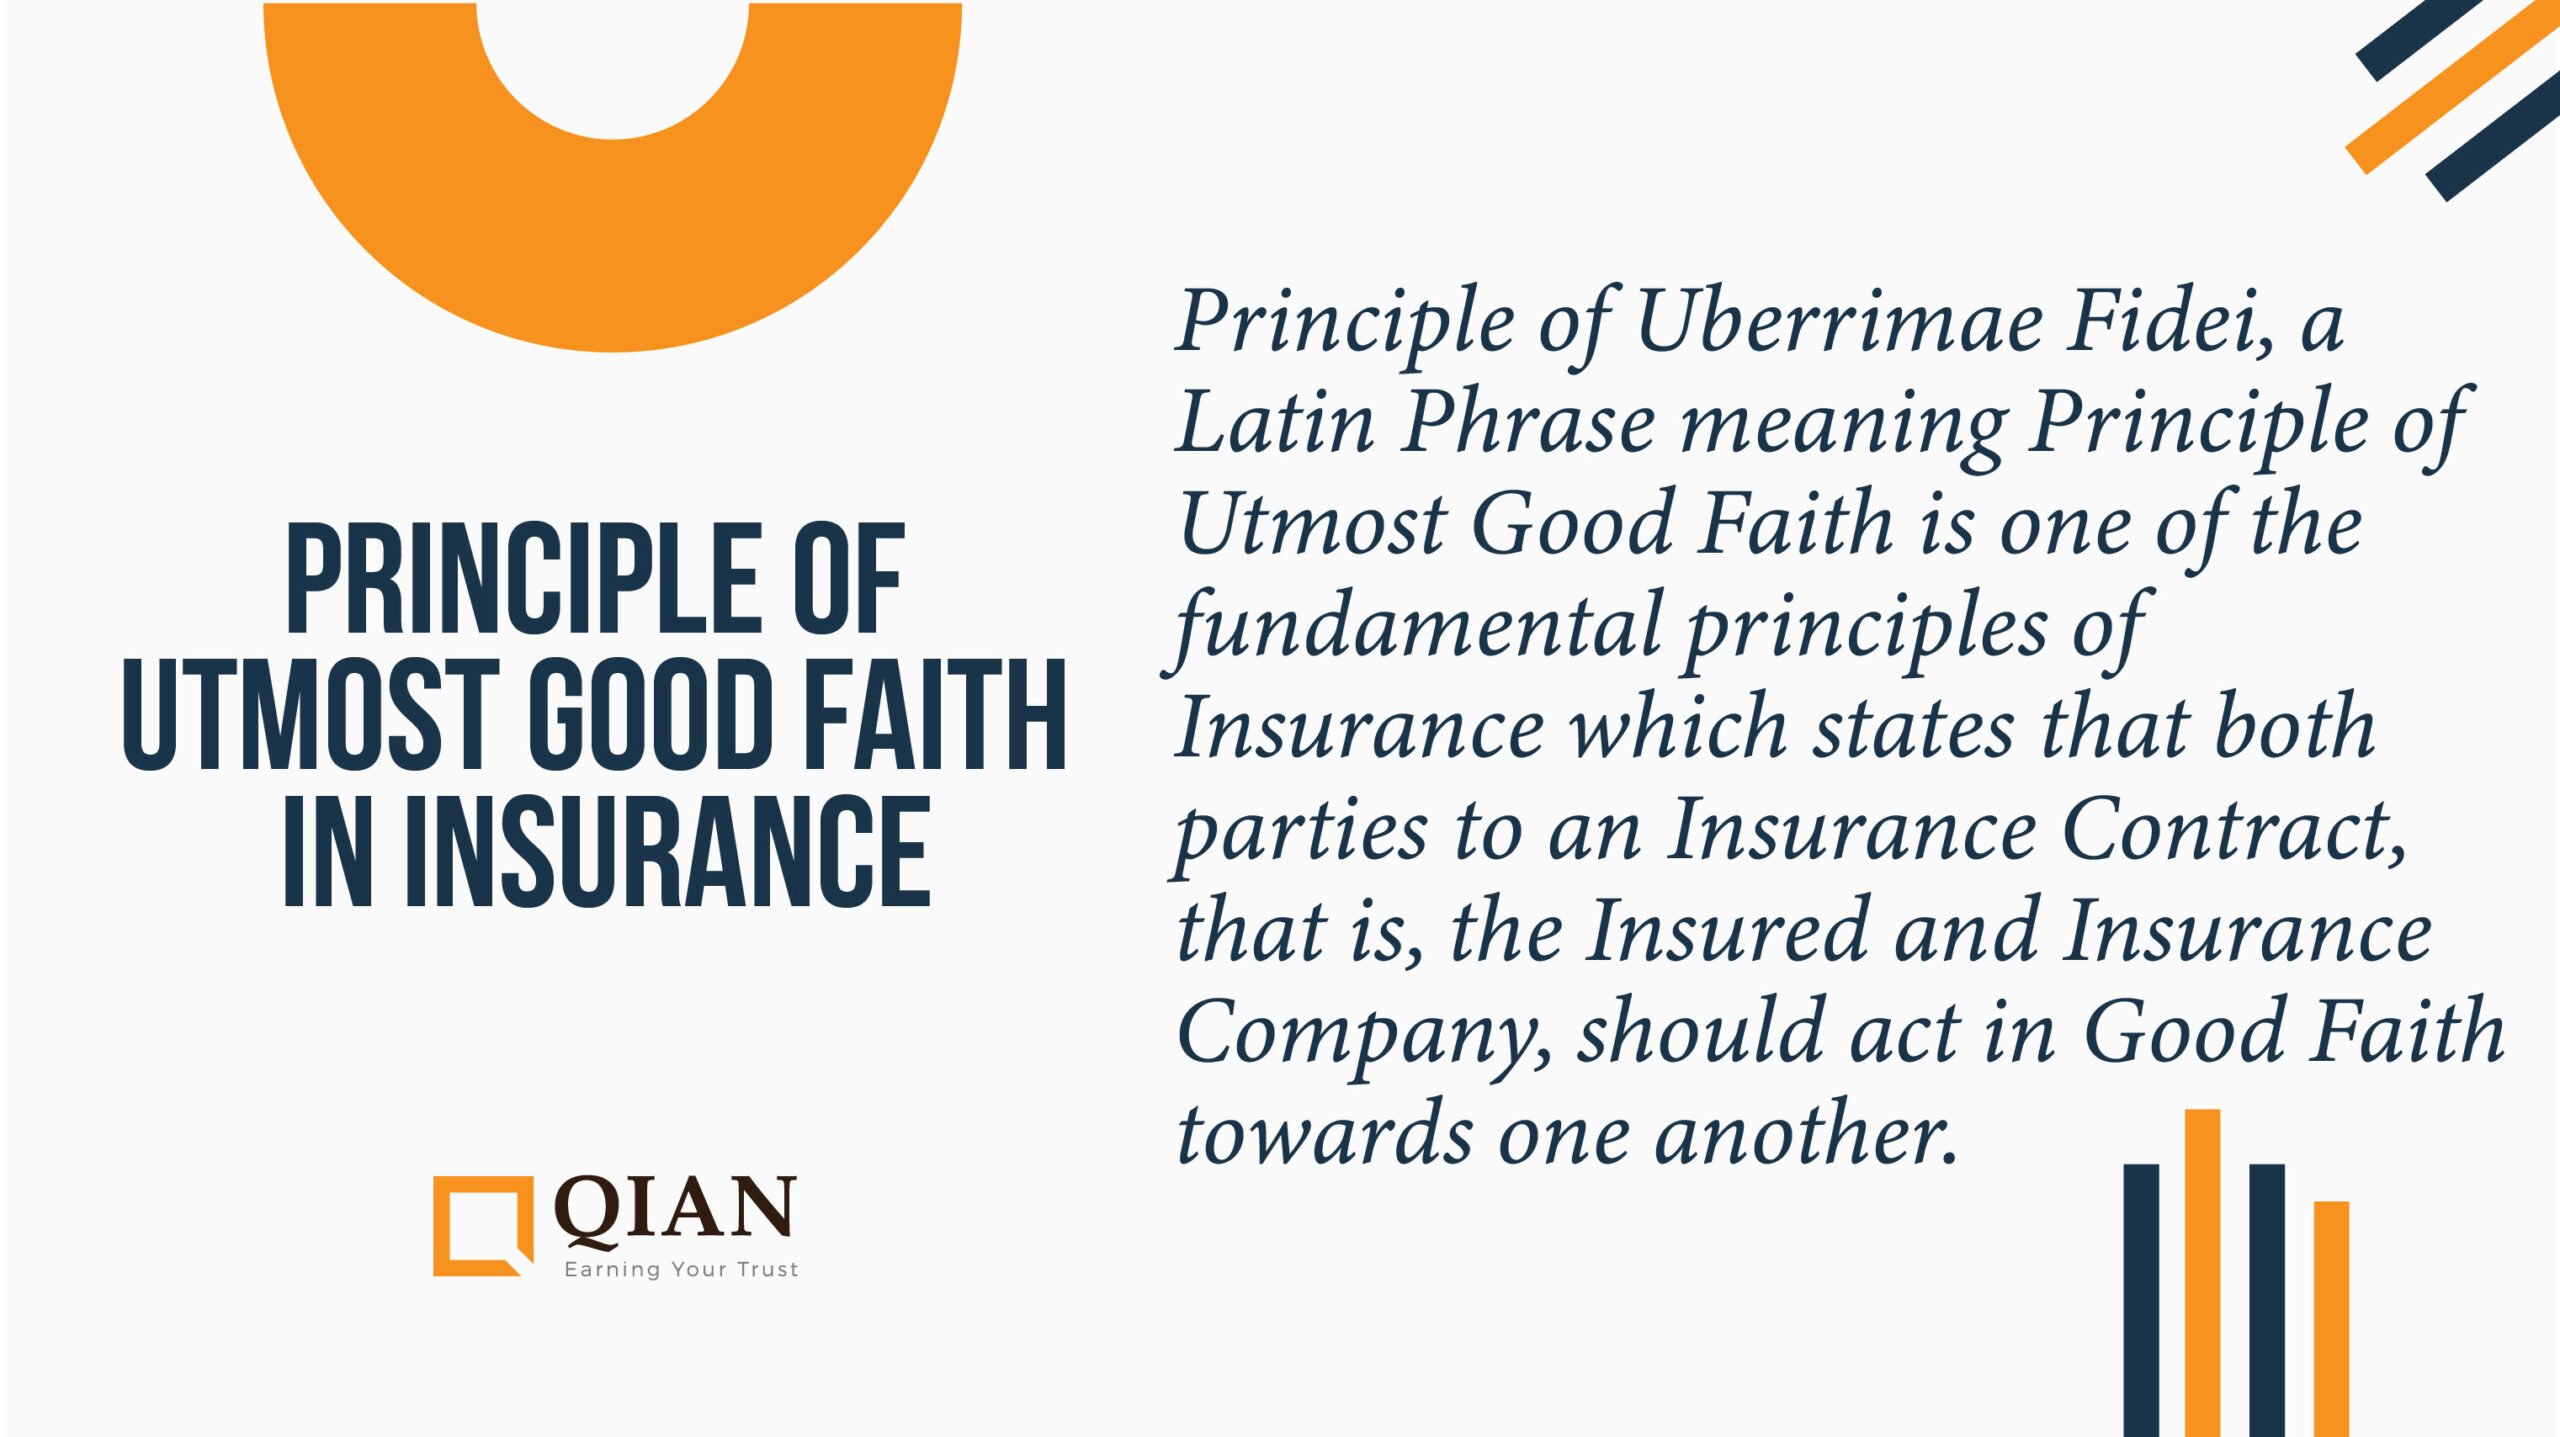 What is Principle of Utmost Good Faith in Insurance?